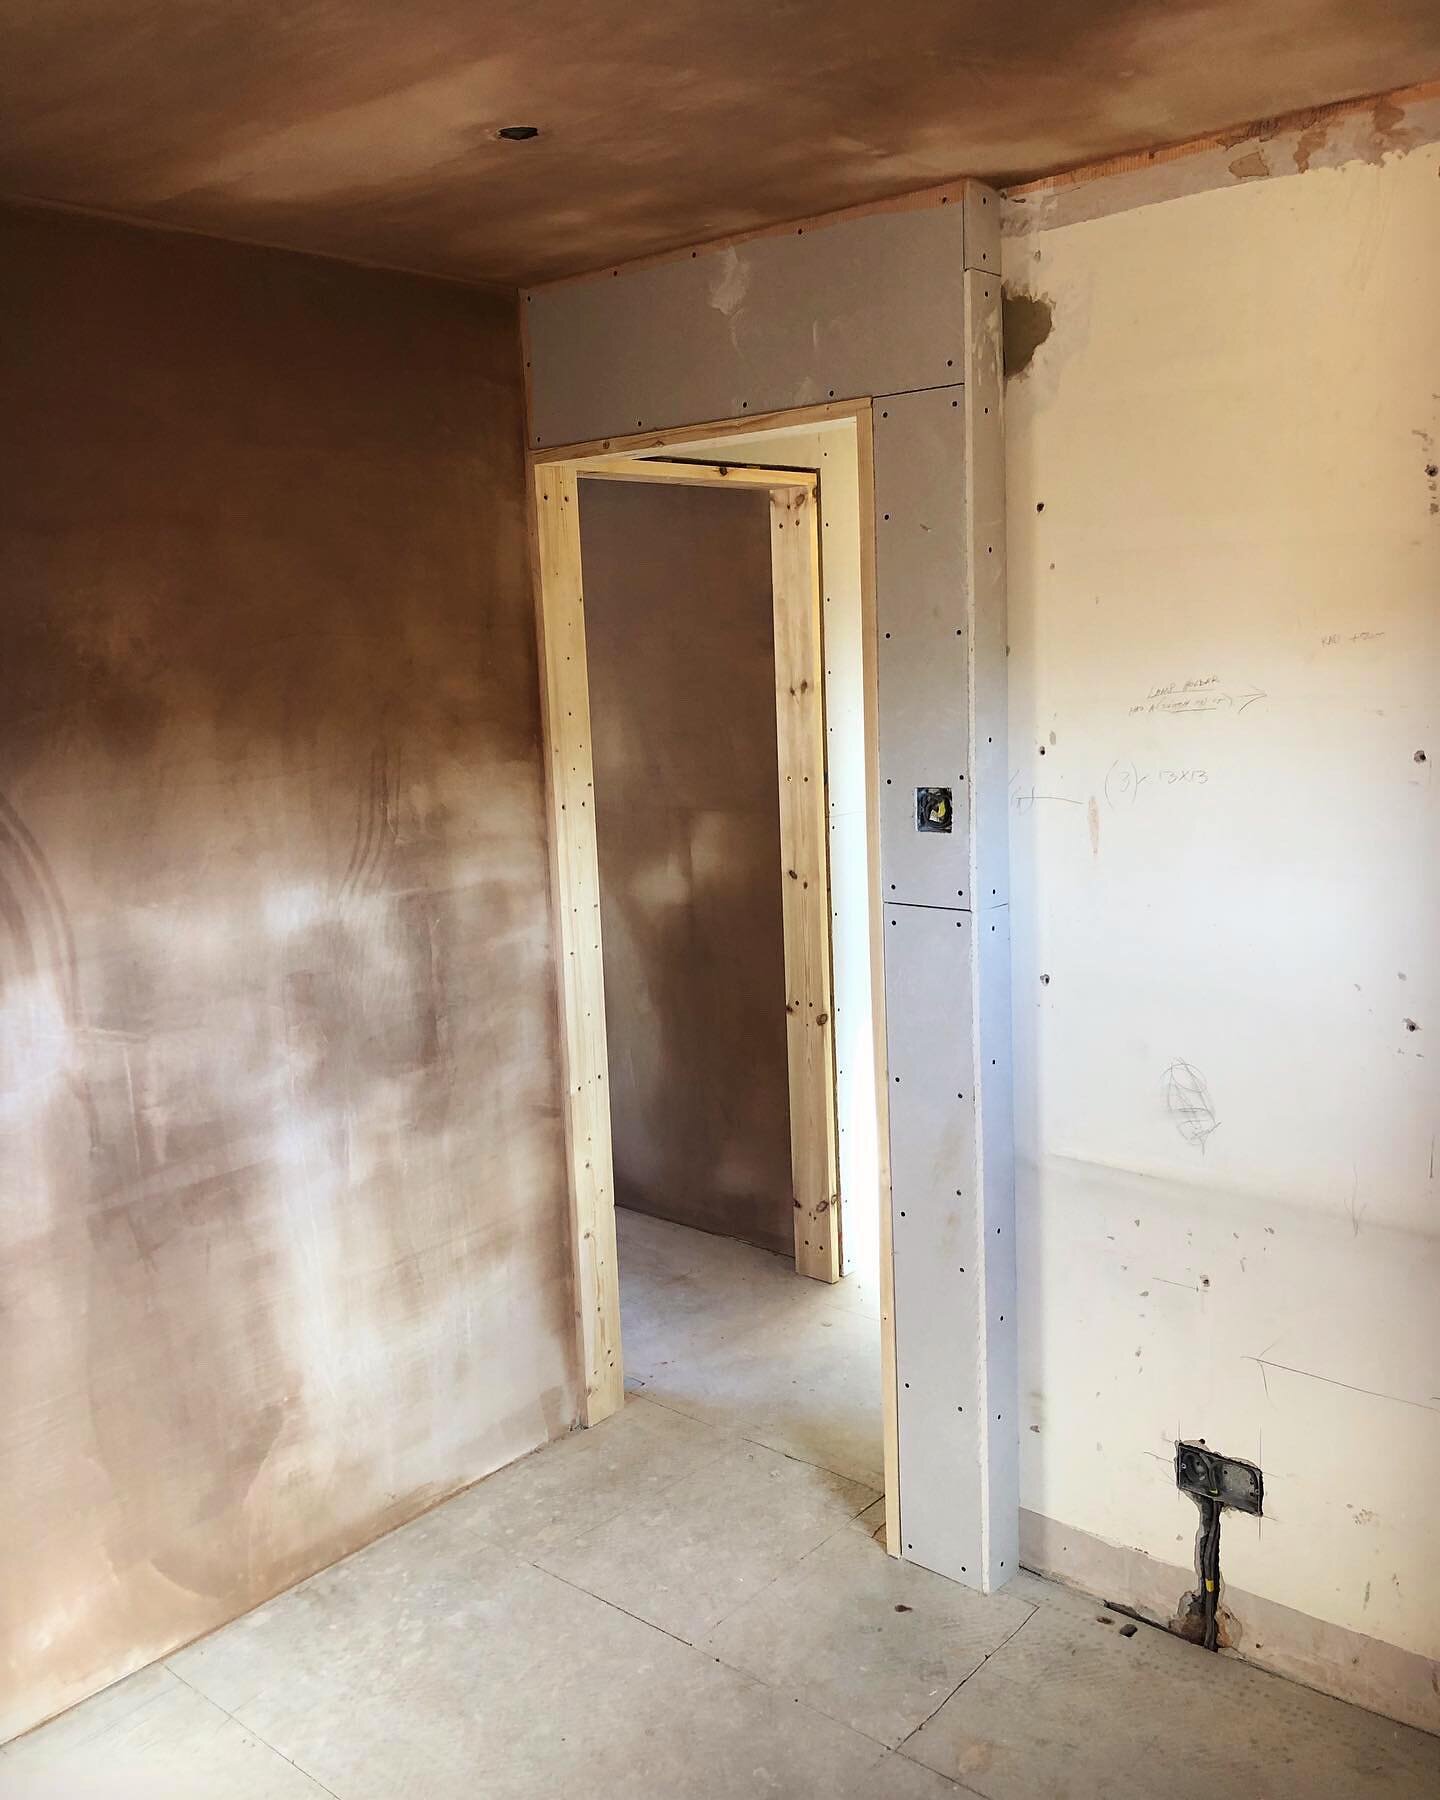 HMO project coming along fast.  Old walls removed✅ceilings over boarded ✅ New walls up ✅and plaster is going on. We&rsquo;re Smashing it 💪🏼 @exetercarpentrysolutions #carpentry #carpenter #builder #hmo #renovation #construction #plastering #sandrca